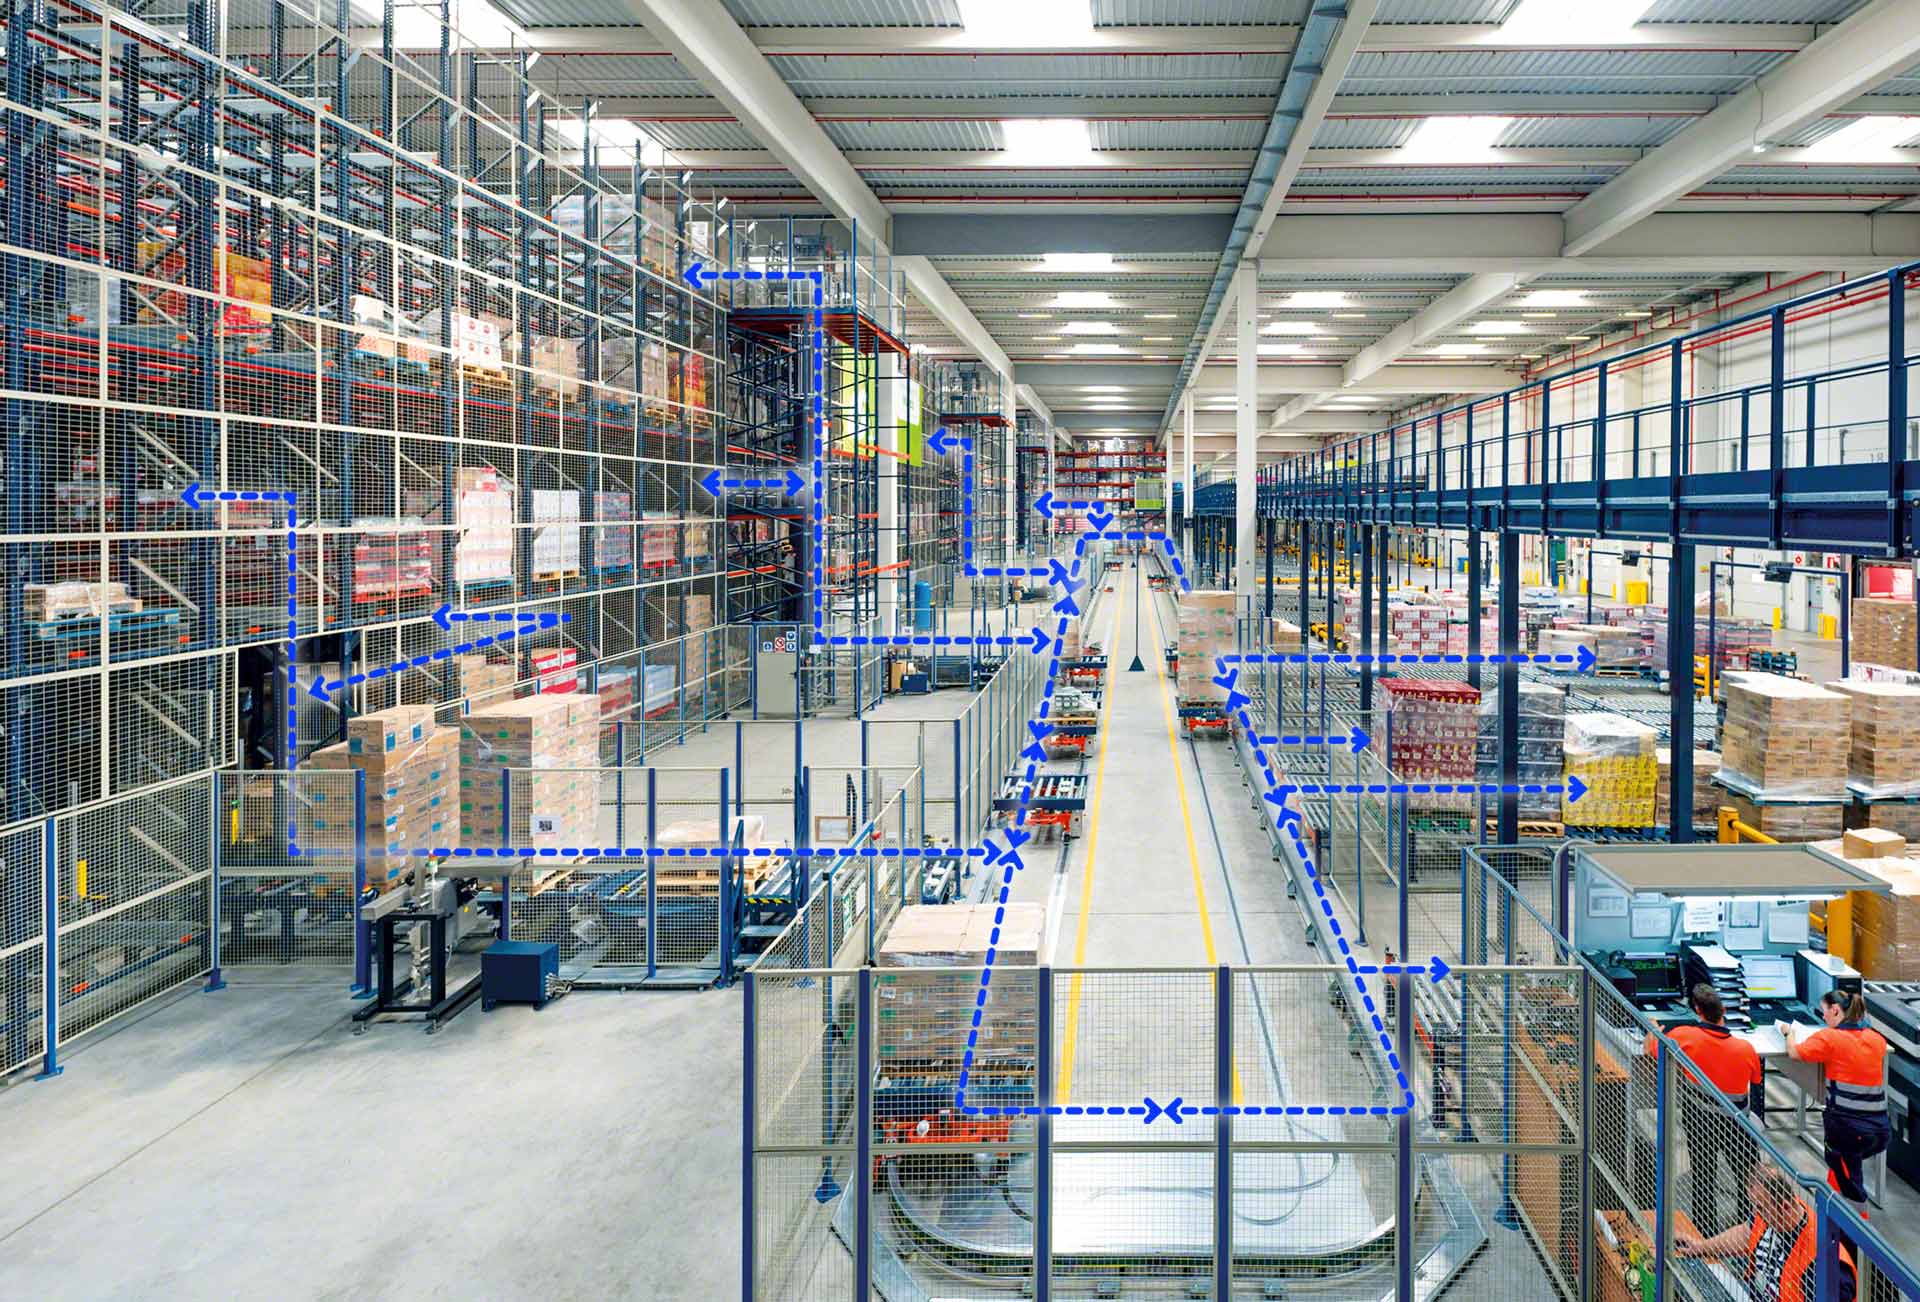 Supply chain flow: key for optimised logistics systems